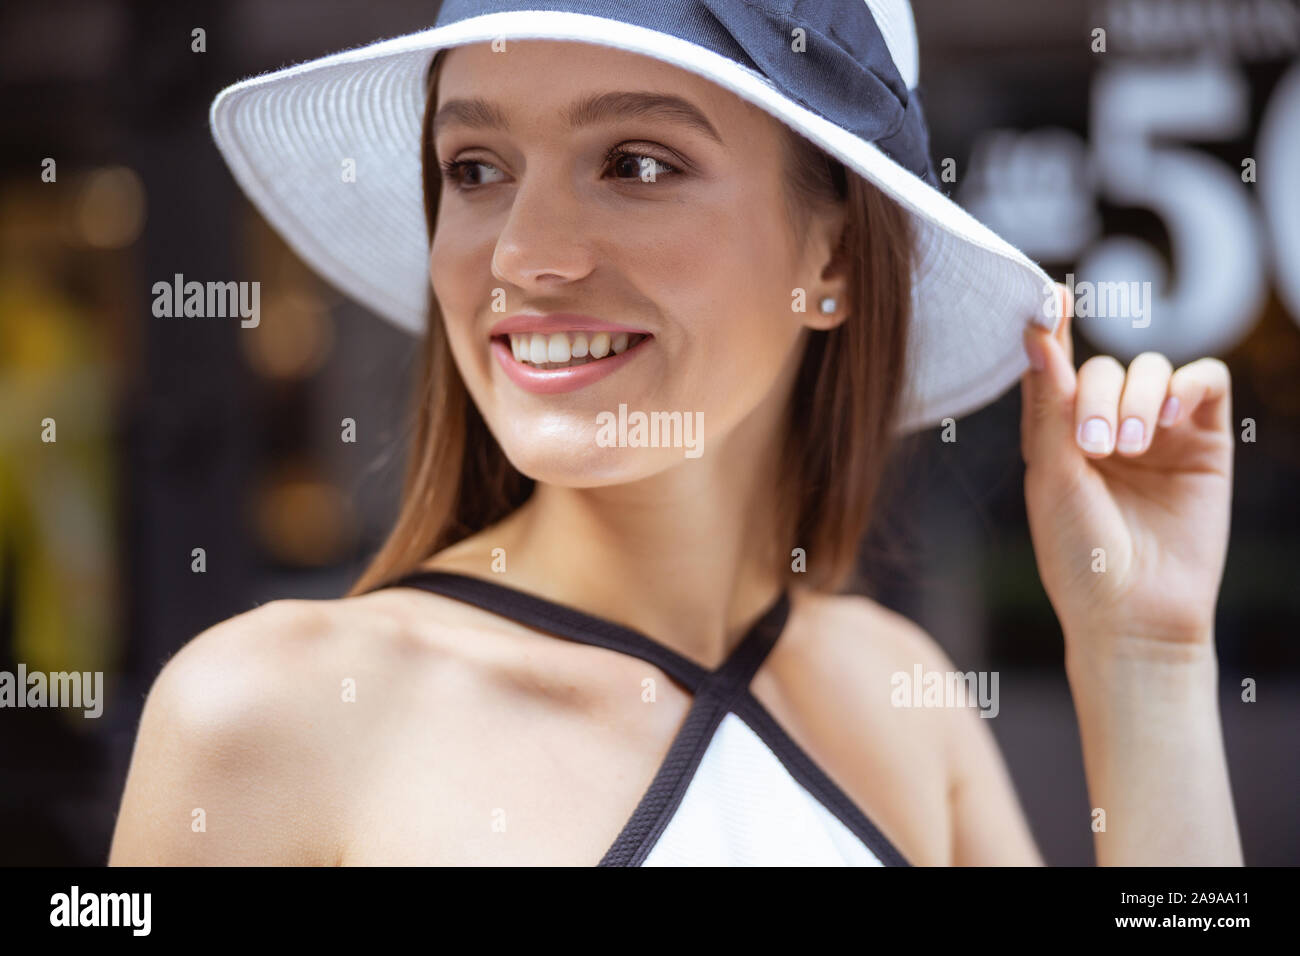 Pretty woman being happy spending her day by herself Stock Photo